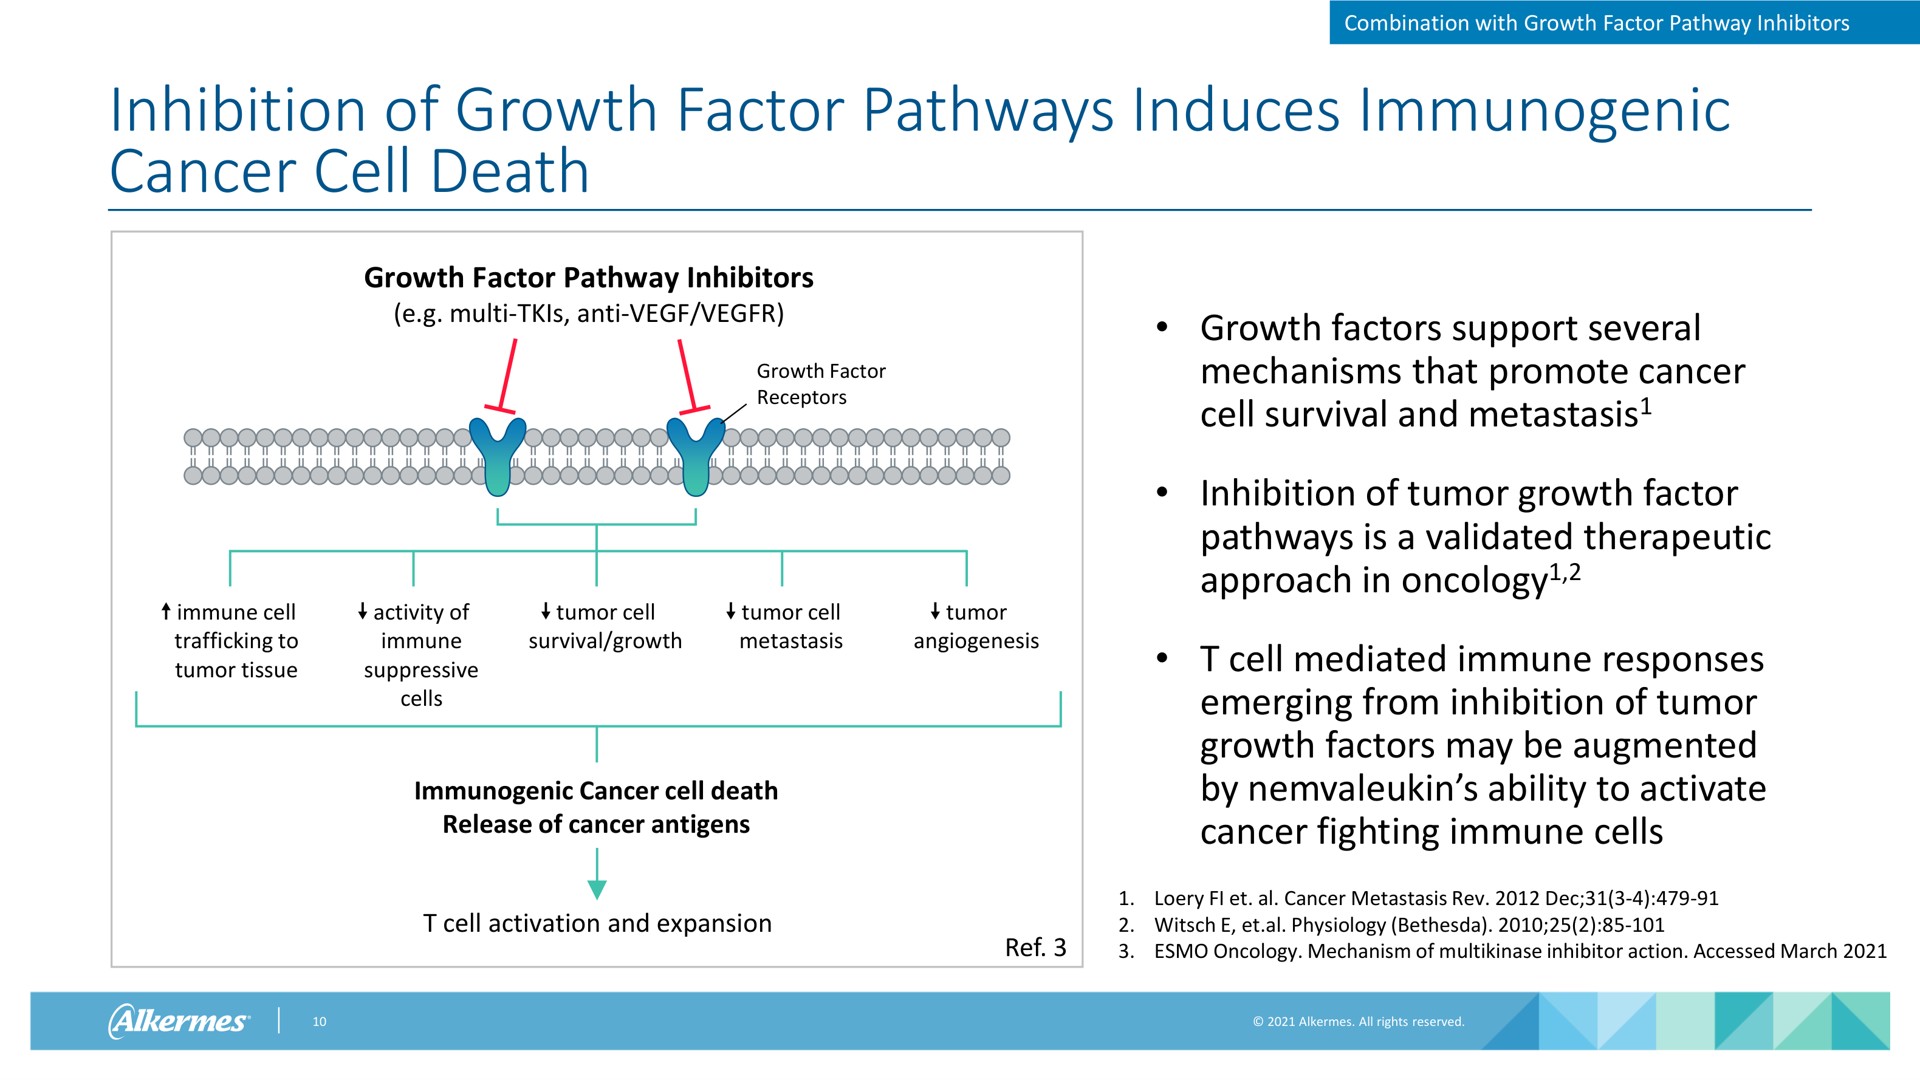 inhibition of growth factor pathways induces immunogenic cancer cell death combination with growth factor pathway inhibitors growth factor pathway inhibitors anti growth factor receptors immune cell trafficking to tumor tissue activity of immune suppressive cells tumor cell survival growth tumor cell metastasis tumor angiogenesis growth factors support several mechanisms that promote cancer cell survival and metastasis inhibition of tumor growth factor pathways is a validated therapeutic approach in oncology cell mediated immune responses emerging from inhibition of tumor growth factors may be augmented by ability to activate cancer fighting immune cells immunogenic cancer cell death release of cancer antigens cell activation and expansion cancer metastasis rev physiology oncology mechanism of inhibitor action accessed march ref | Alkermes